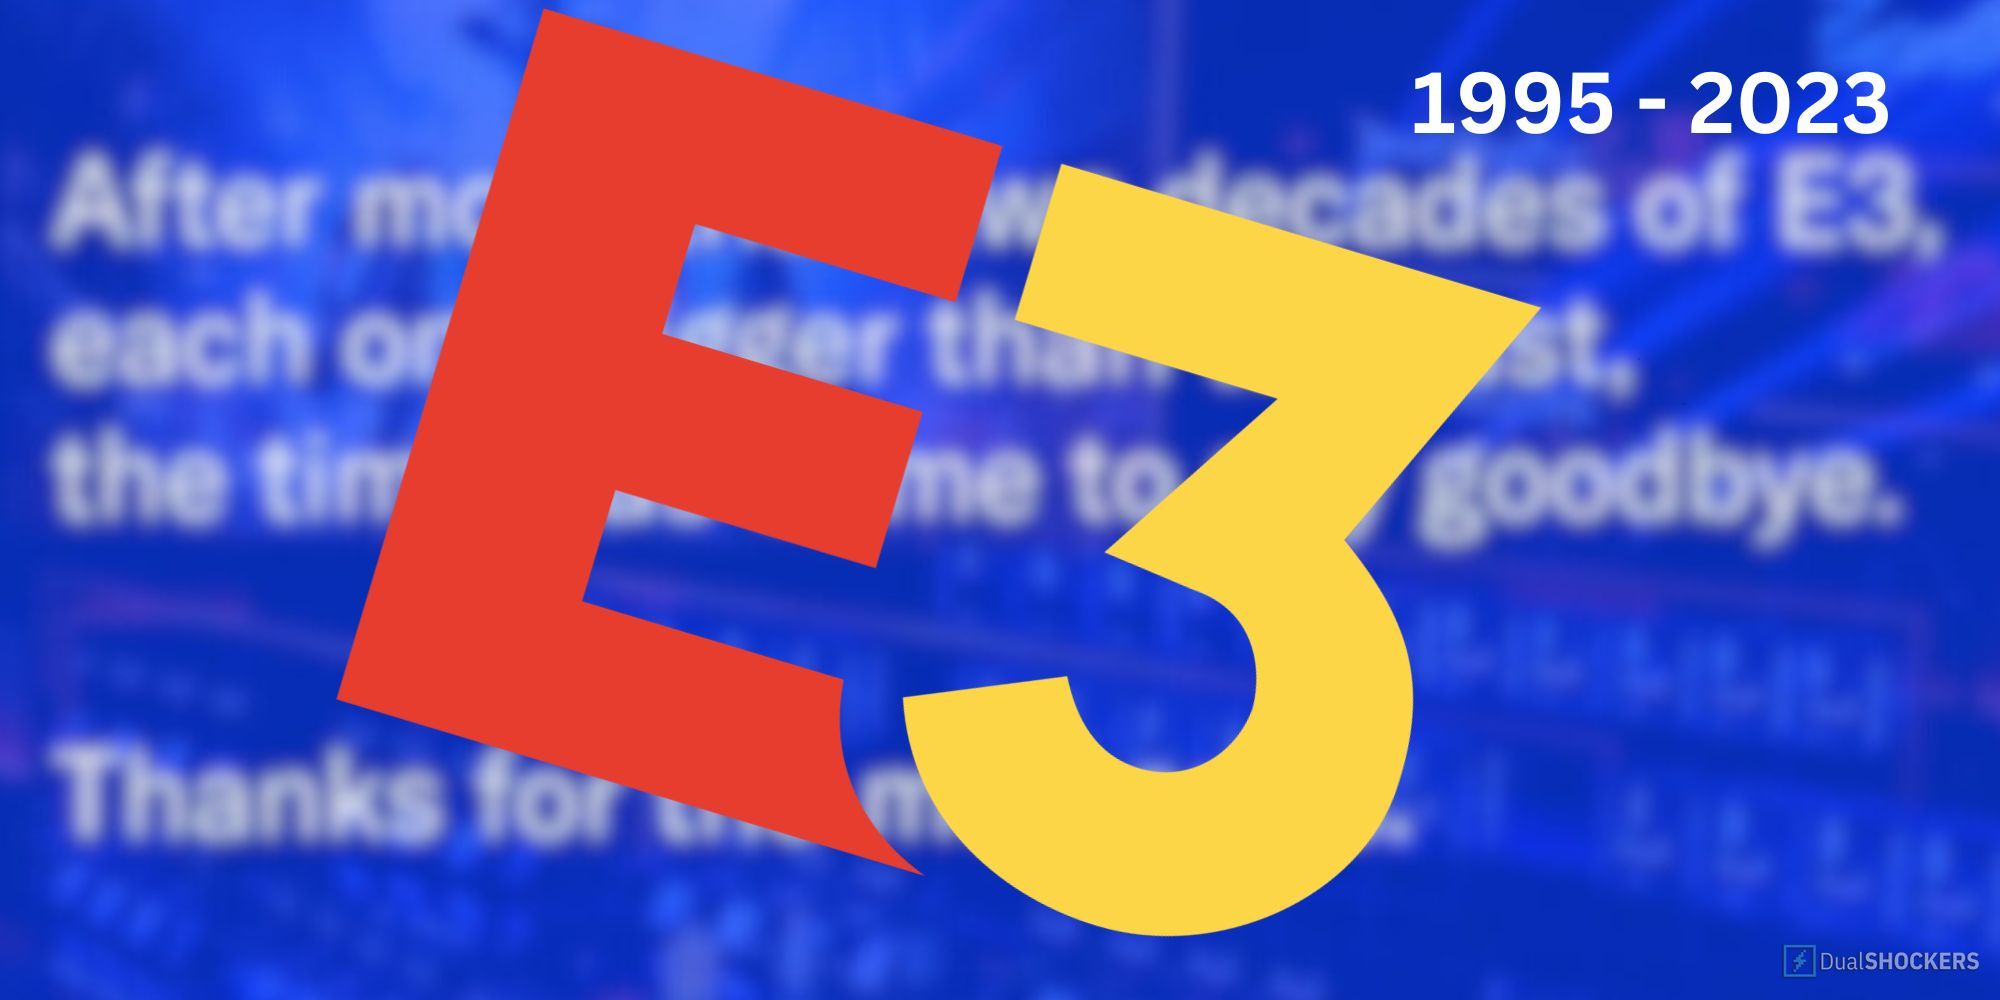 E3 Logo Slanted With Date Of Death In Corner